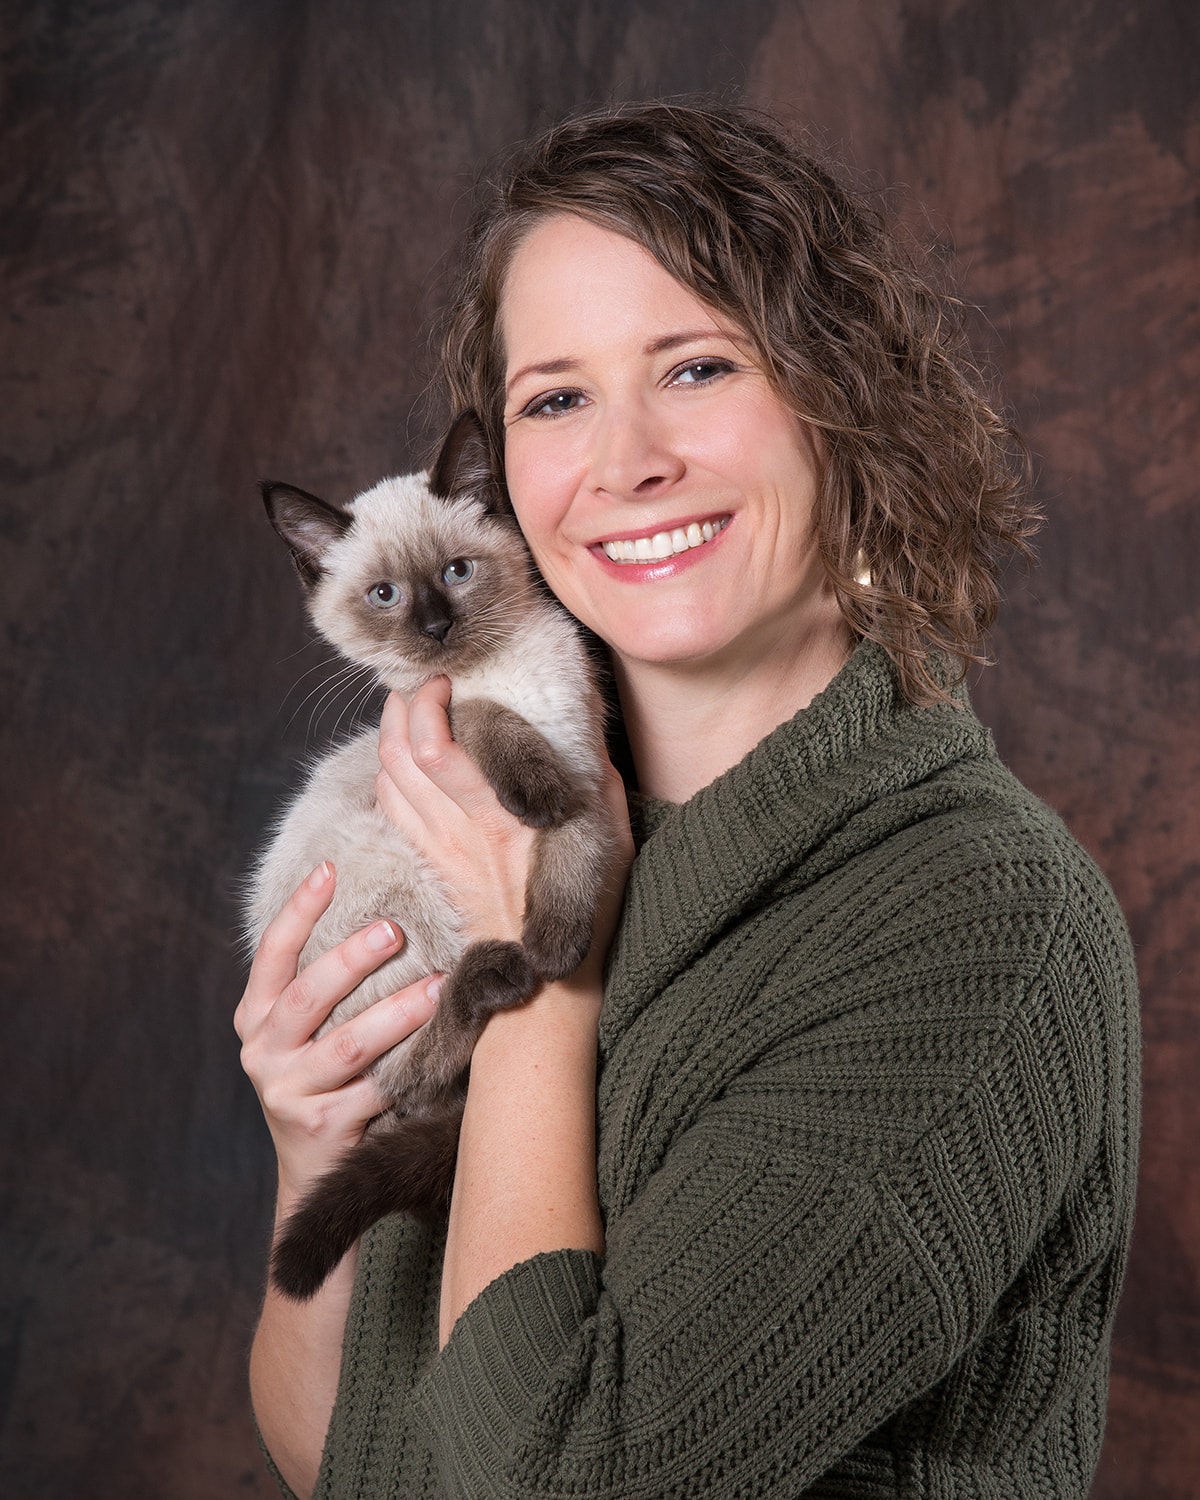 Heather Miller smiling in a green sweater. She is holding a siamese mix kitten up near her face.